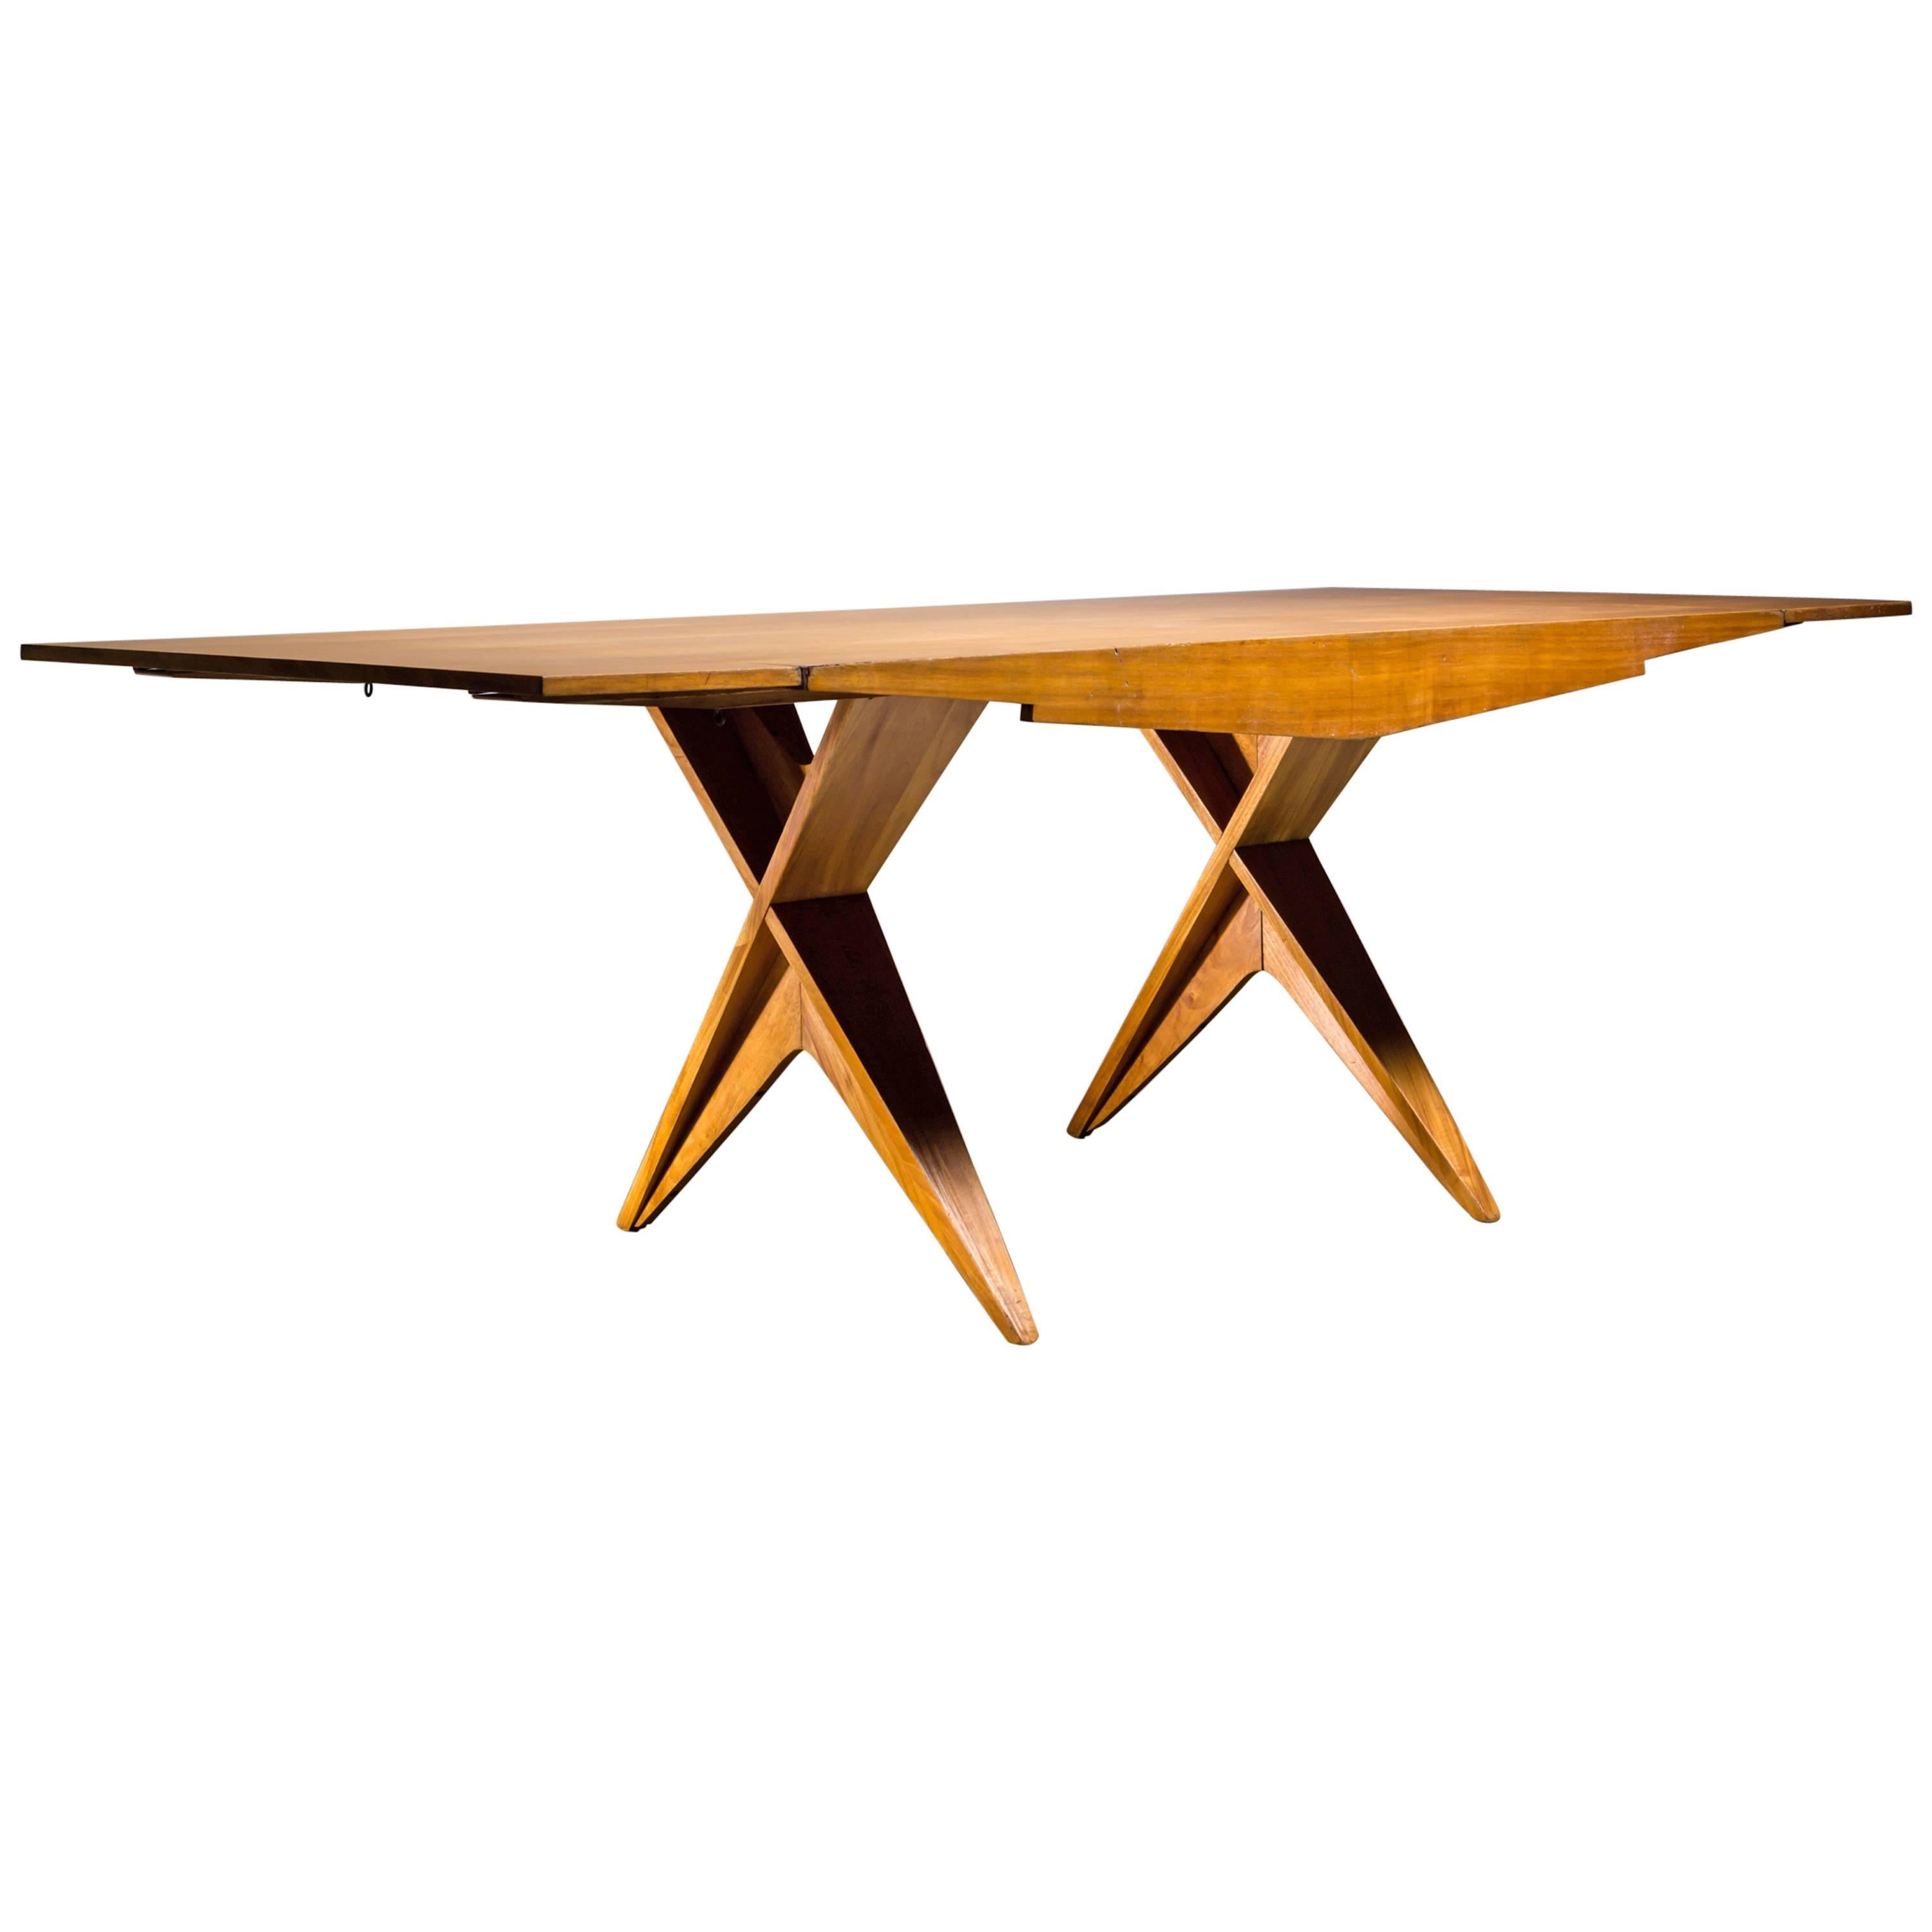 Dan Johnson Architectural and Extendable Dining Table, American, 1947 For Sale